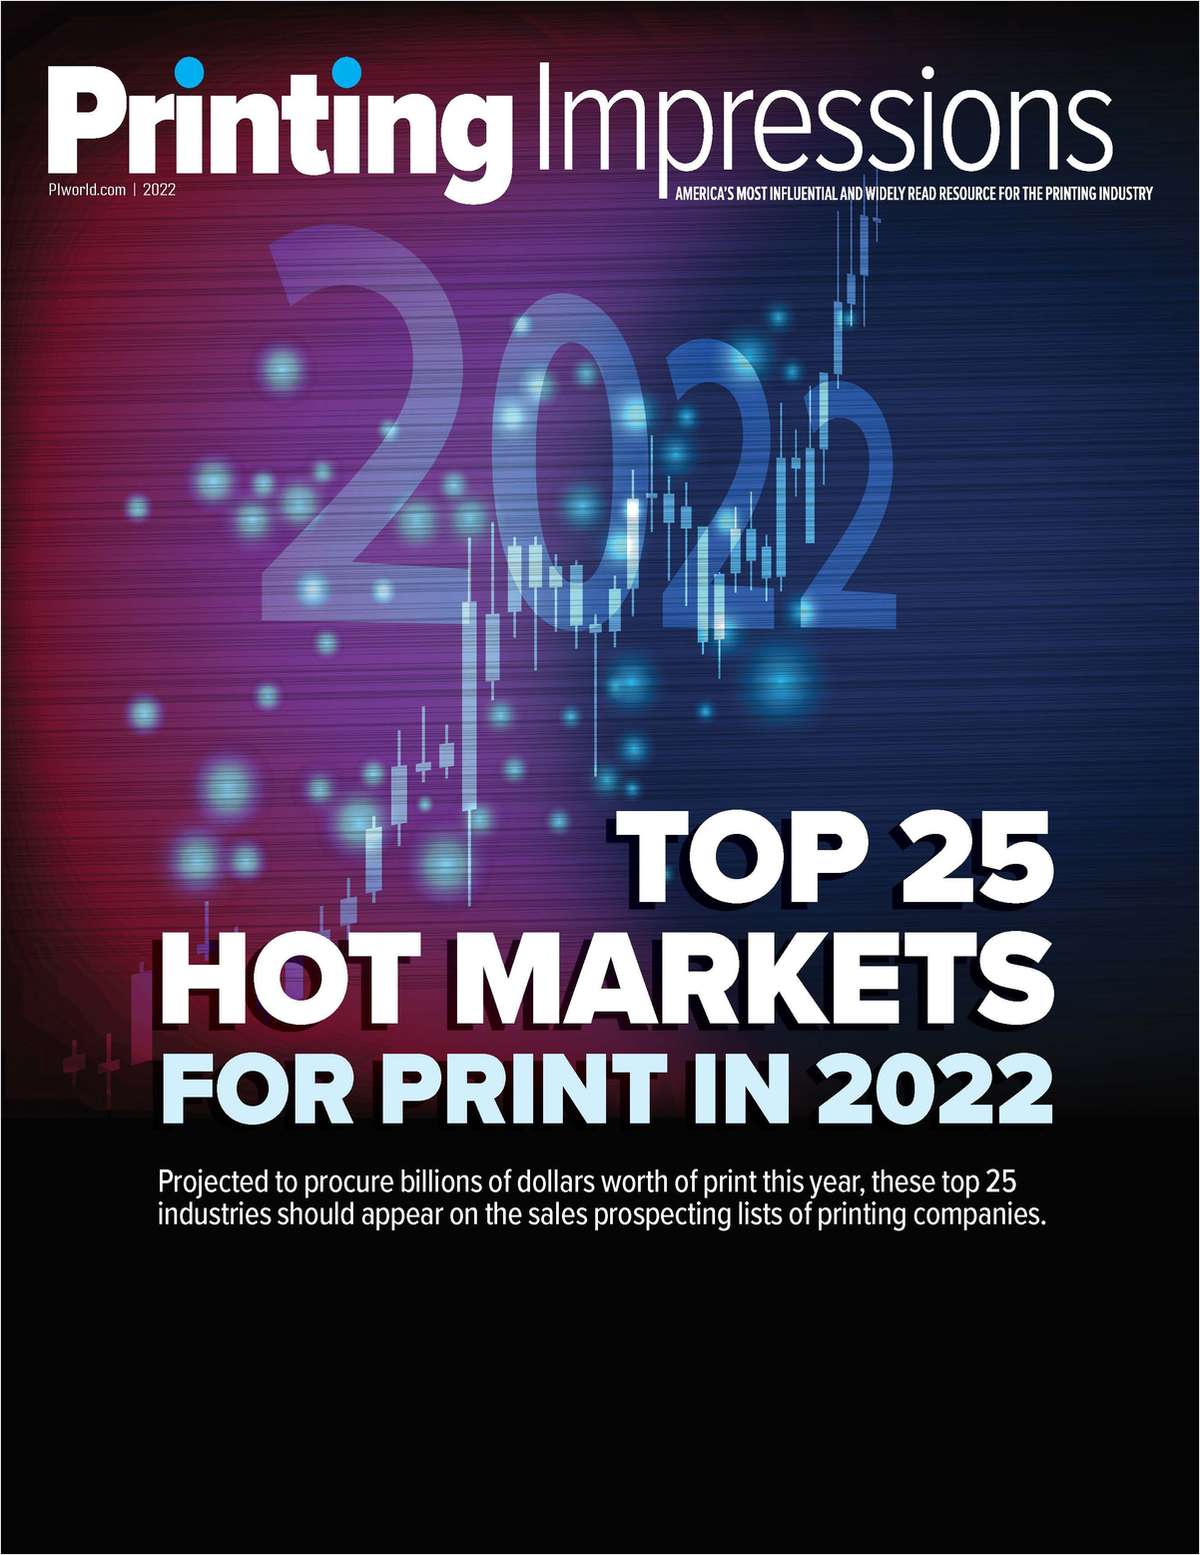 The Top 25 Hot Markets for Printing in 2022